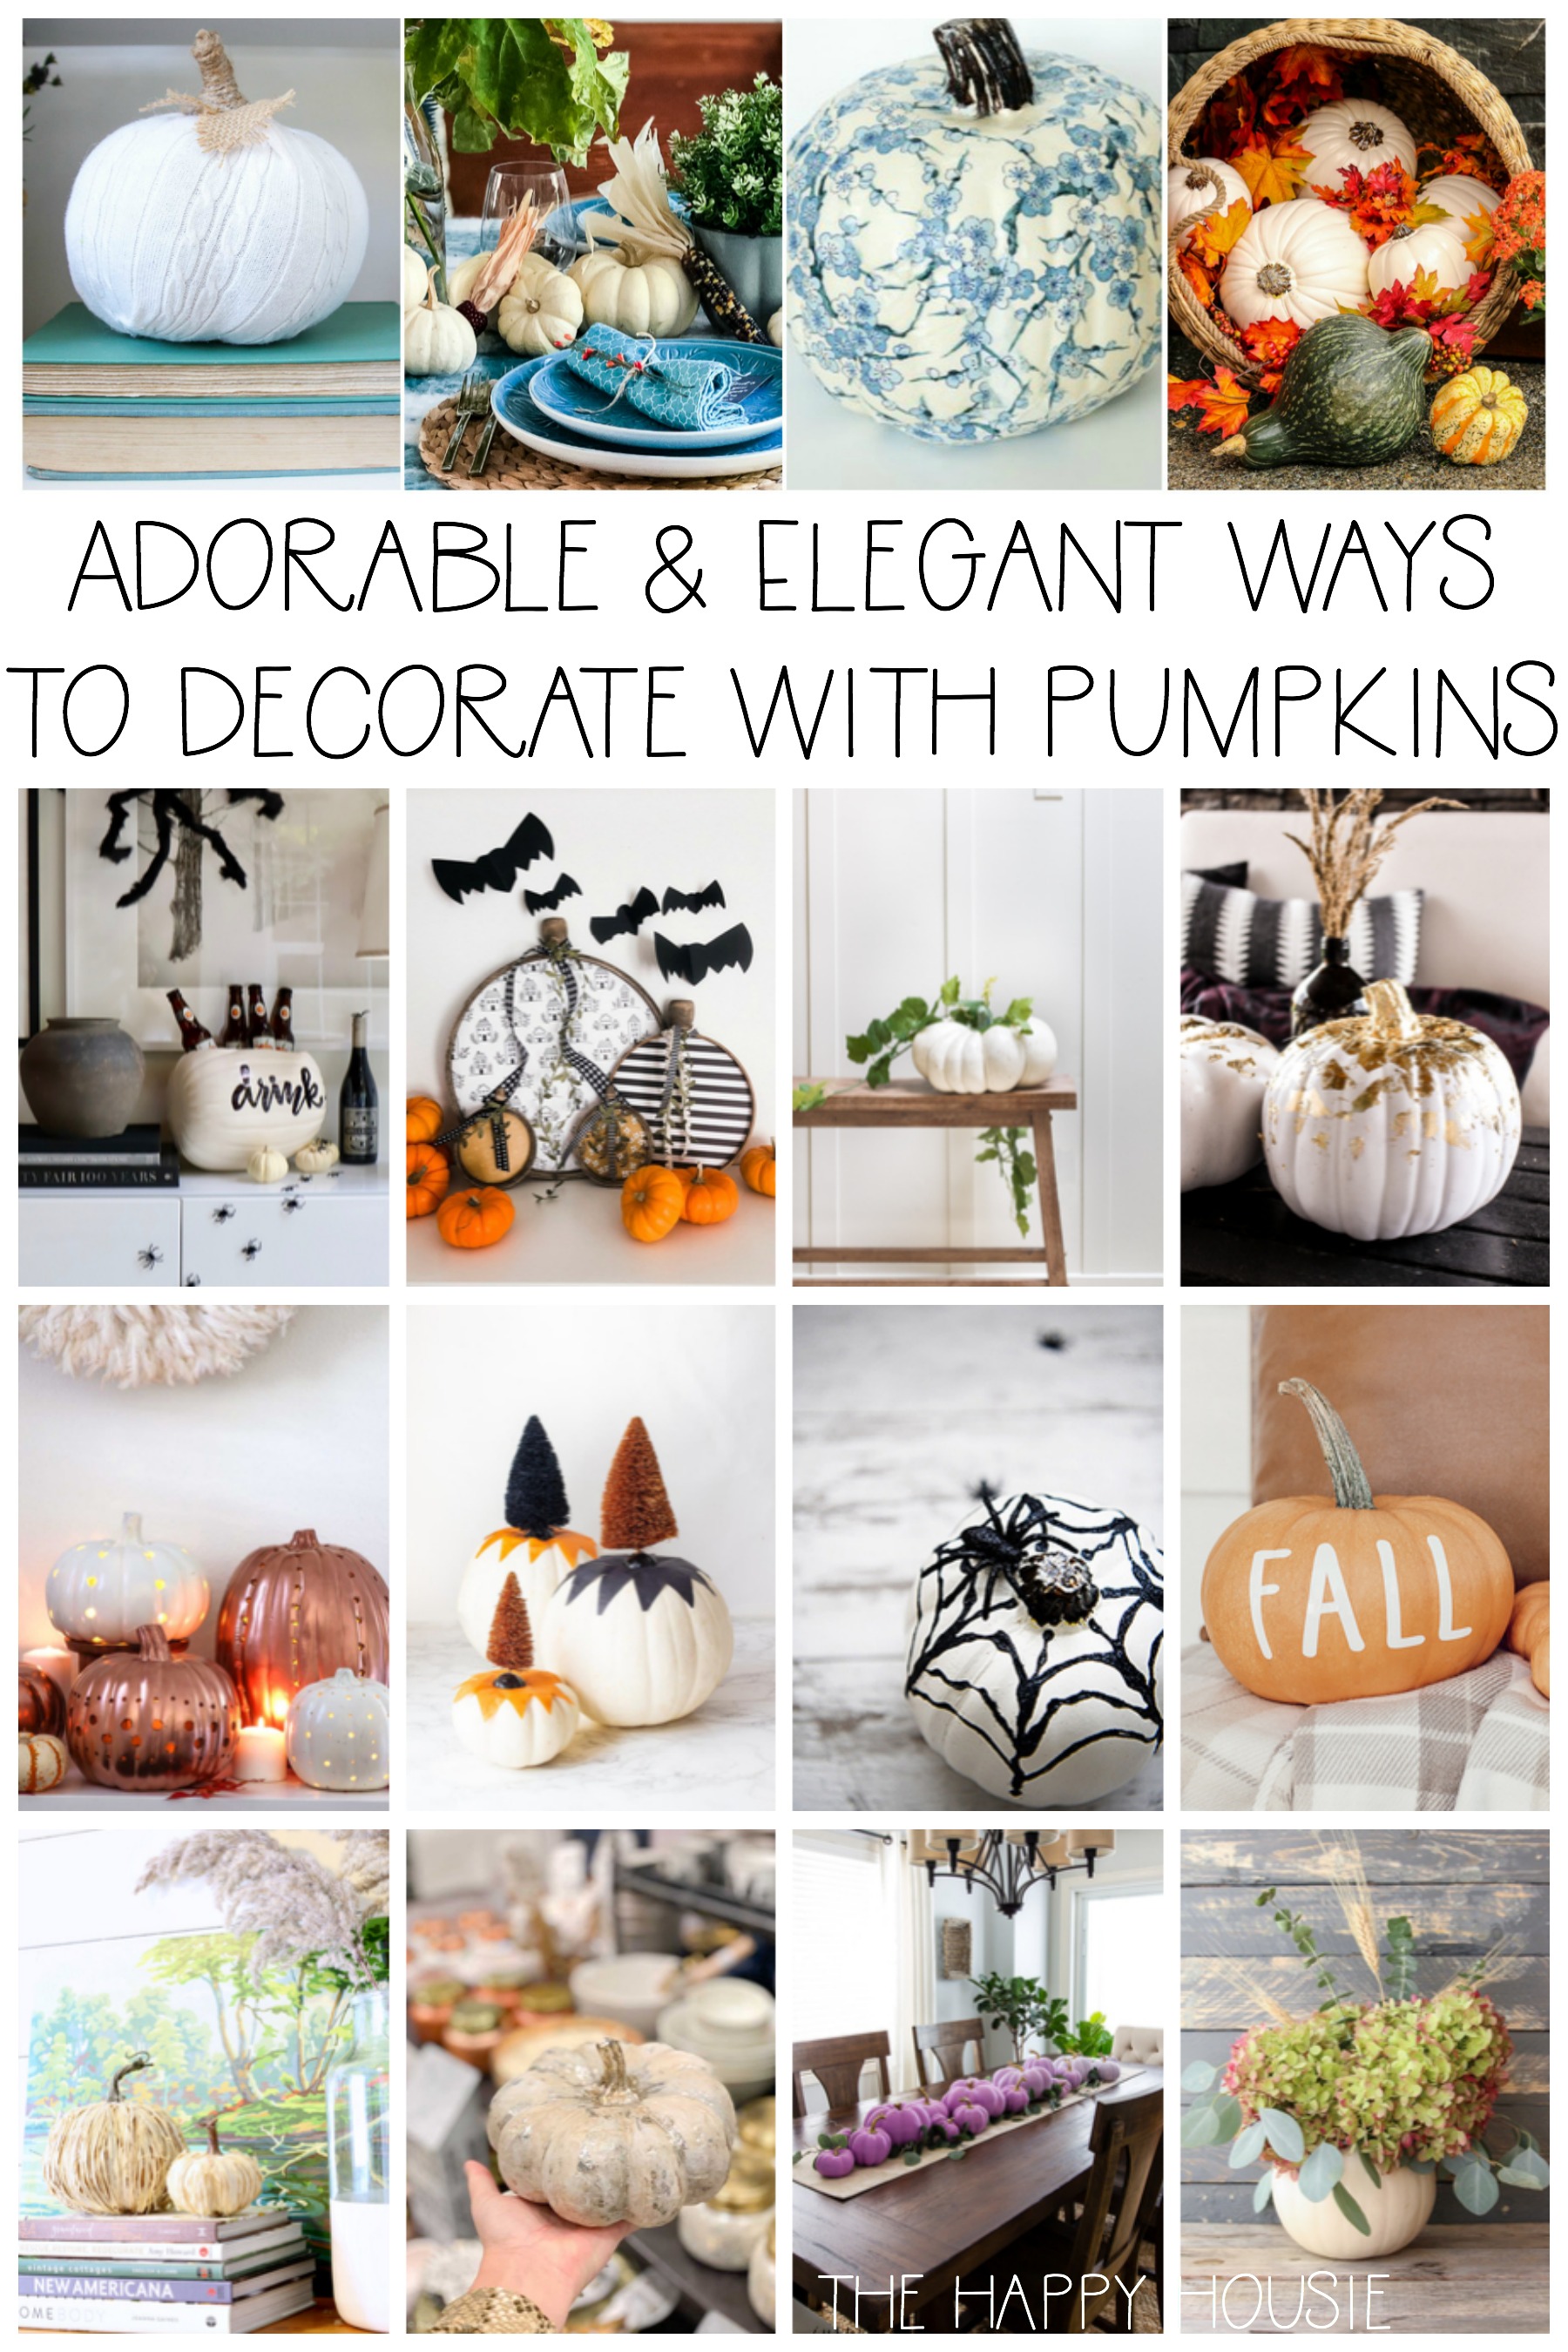 Adorable & Elegant Ways To Decorate With Pumpkins poster.